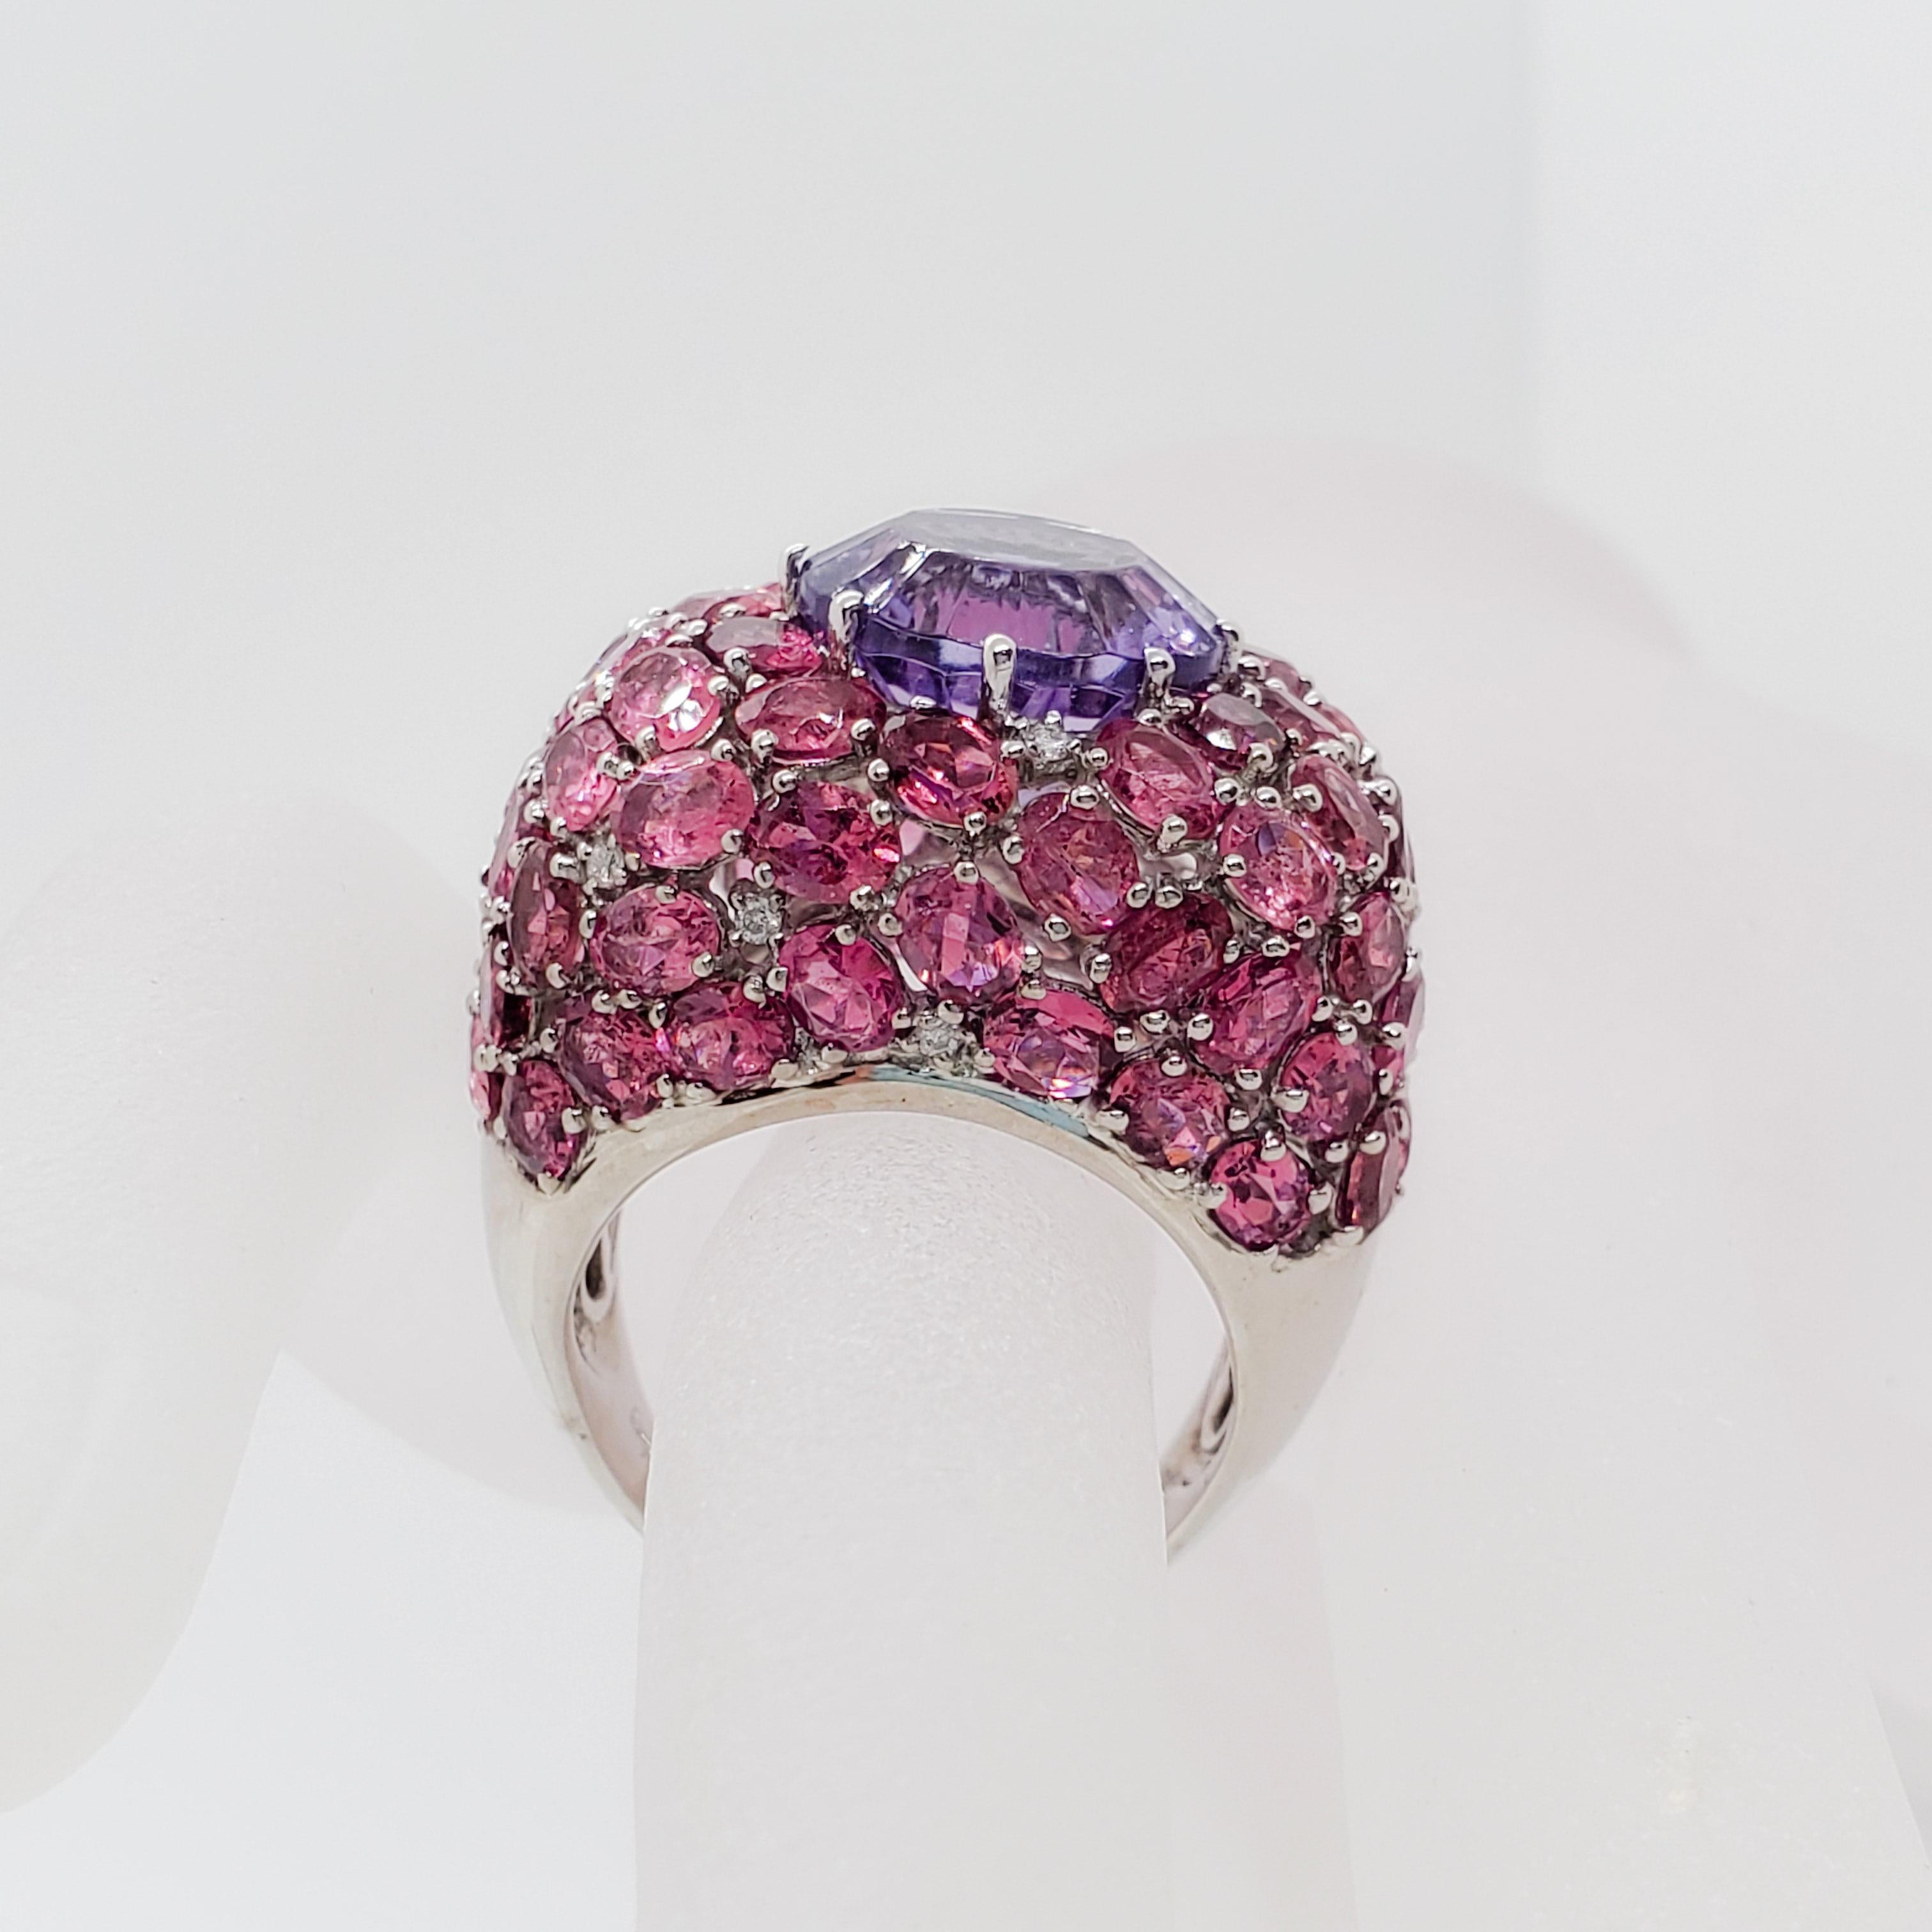 This ring is gorgeous!  Showcasing a 4.05 ct round amethyst, 10.20 cts of pink tourmalines and diamond ovals and rounds in a handmade 18k white gold mounting.  Size 9.  Excellent condition.